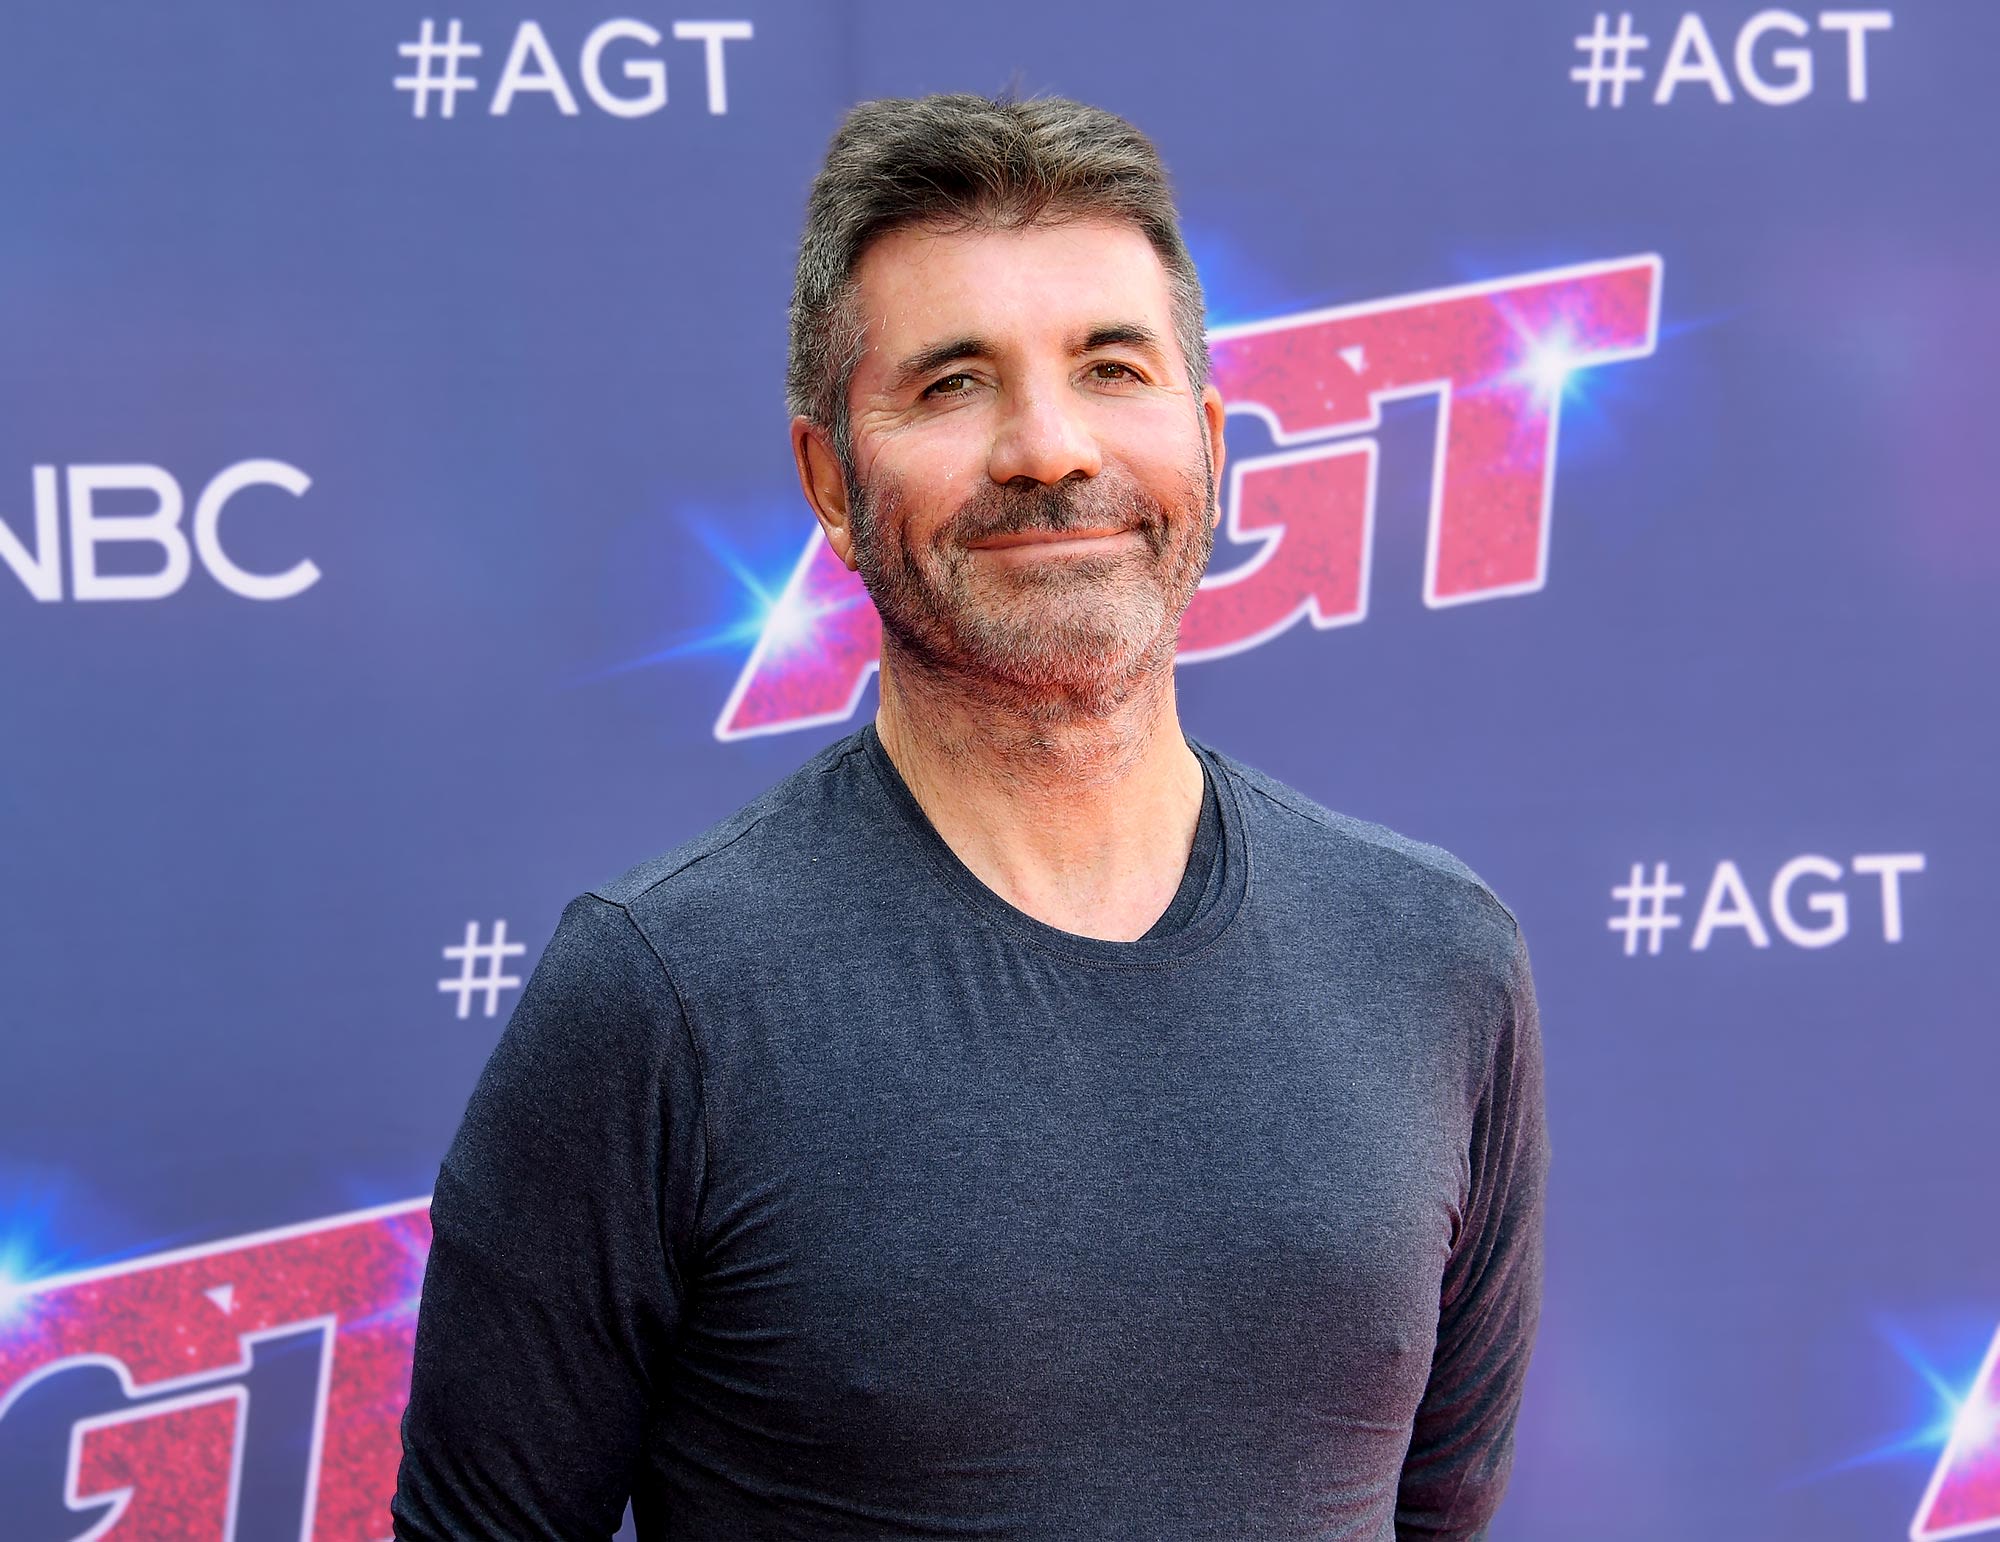 Simon Cowell Is on the Hunt to Create a New Boy Band 14 Years After One Direction